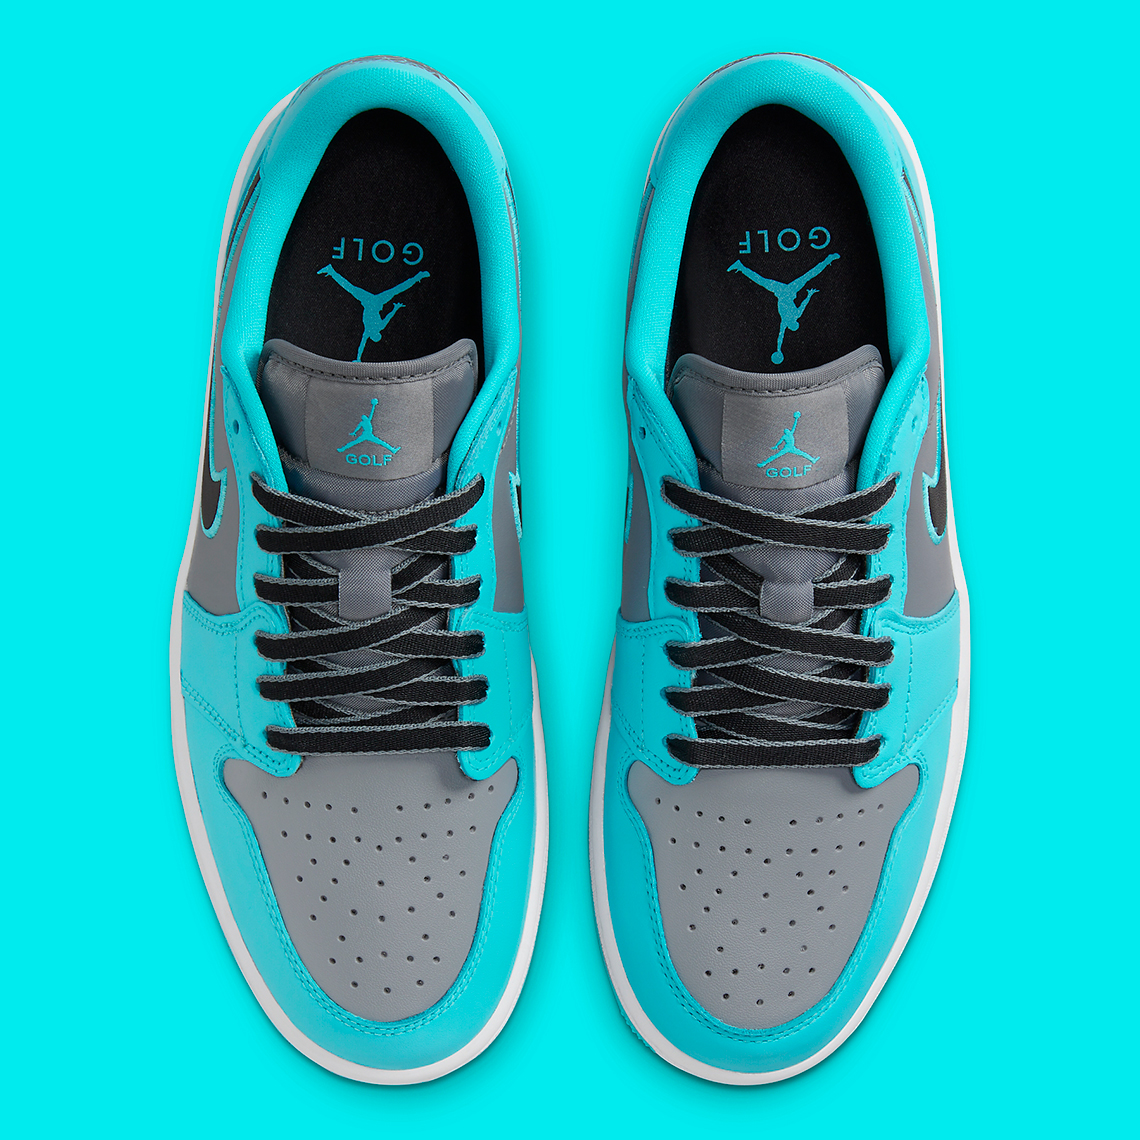 Jordan "Ready to Fly" With Golf Turquoise Fz3248 001 1